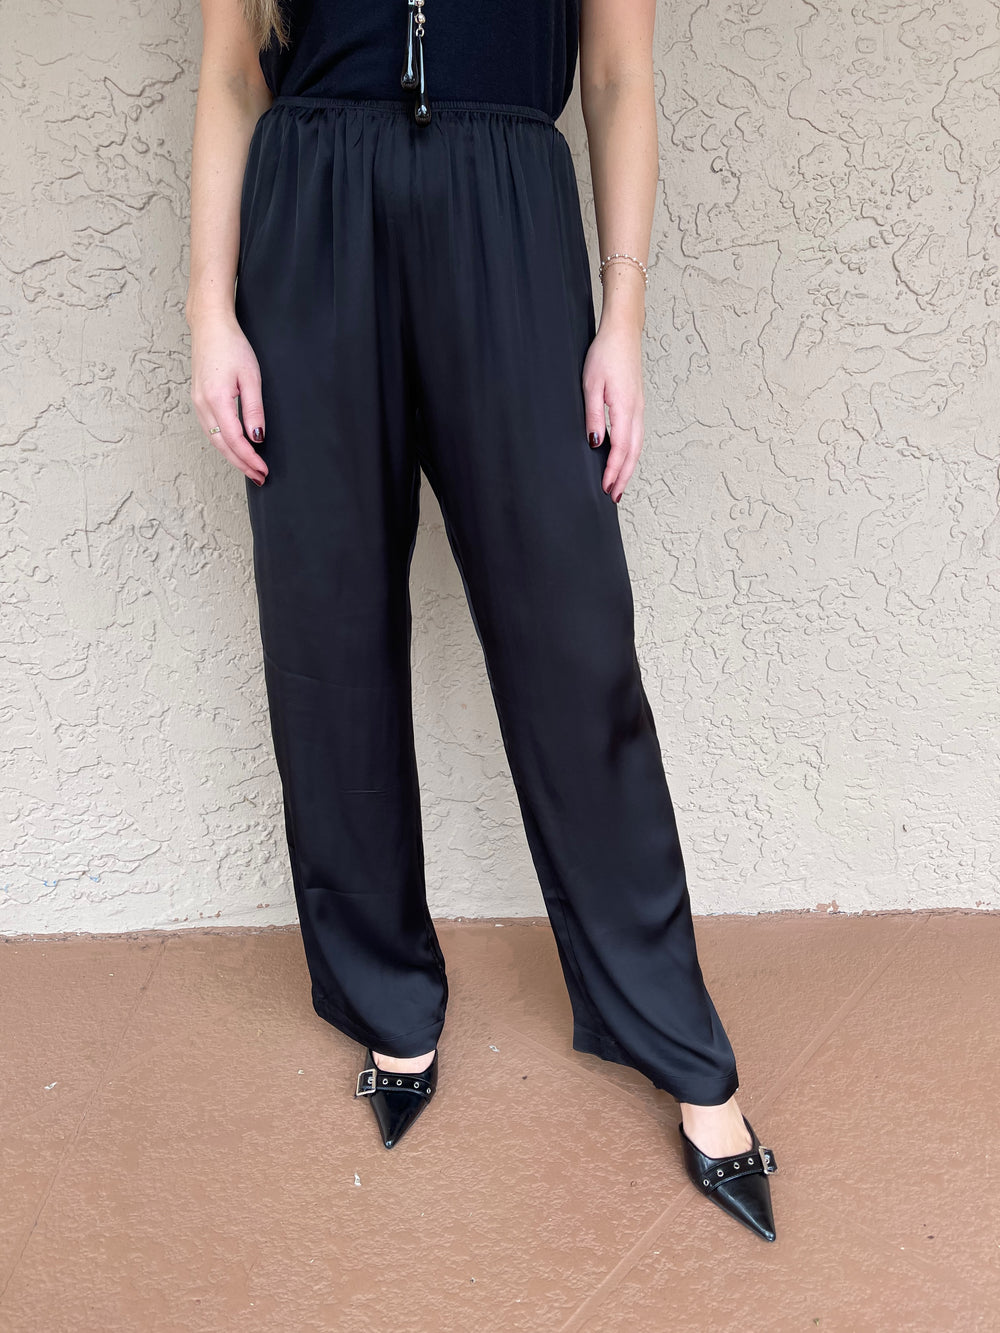 The Silky Simple Pant - Jet